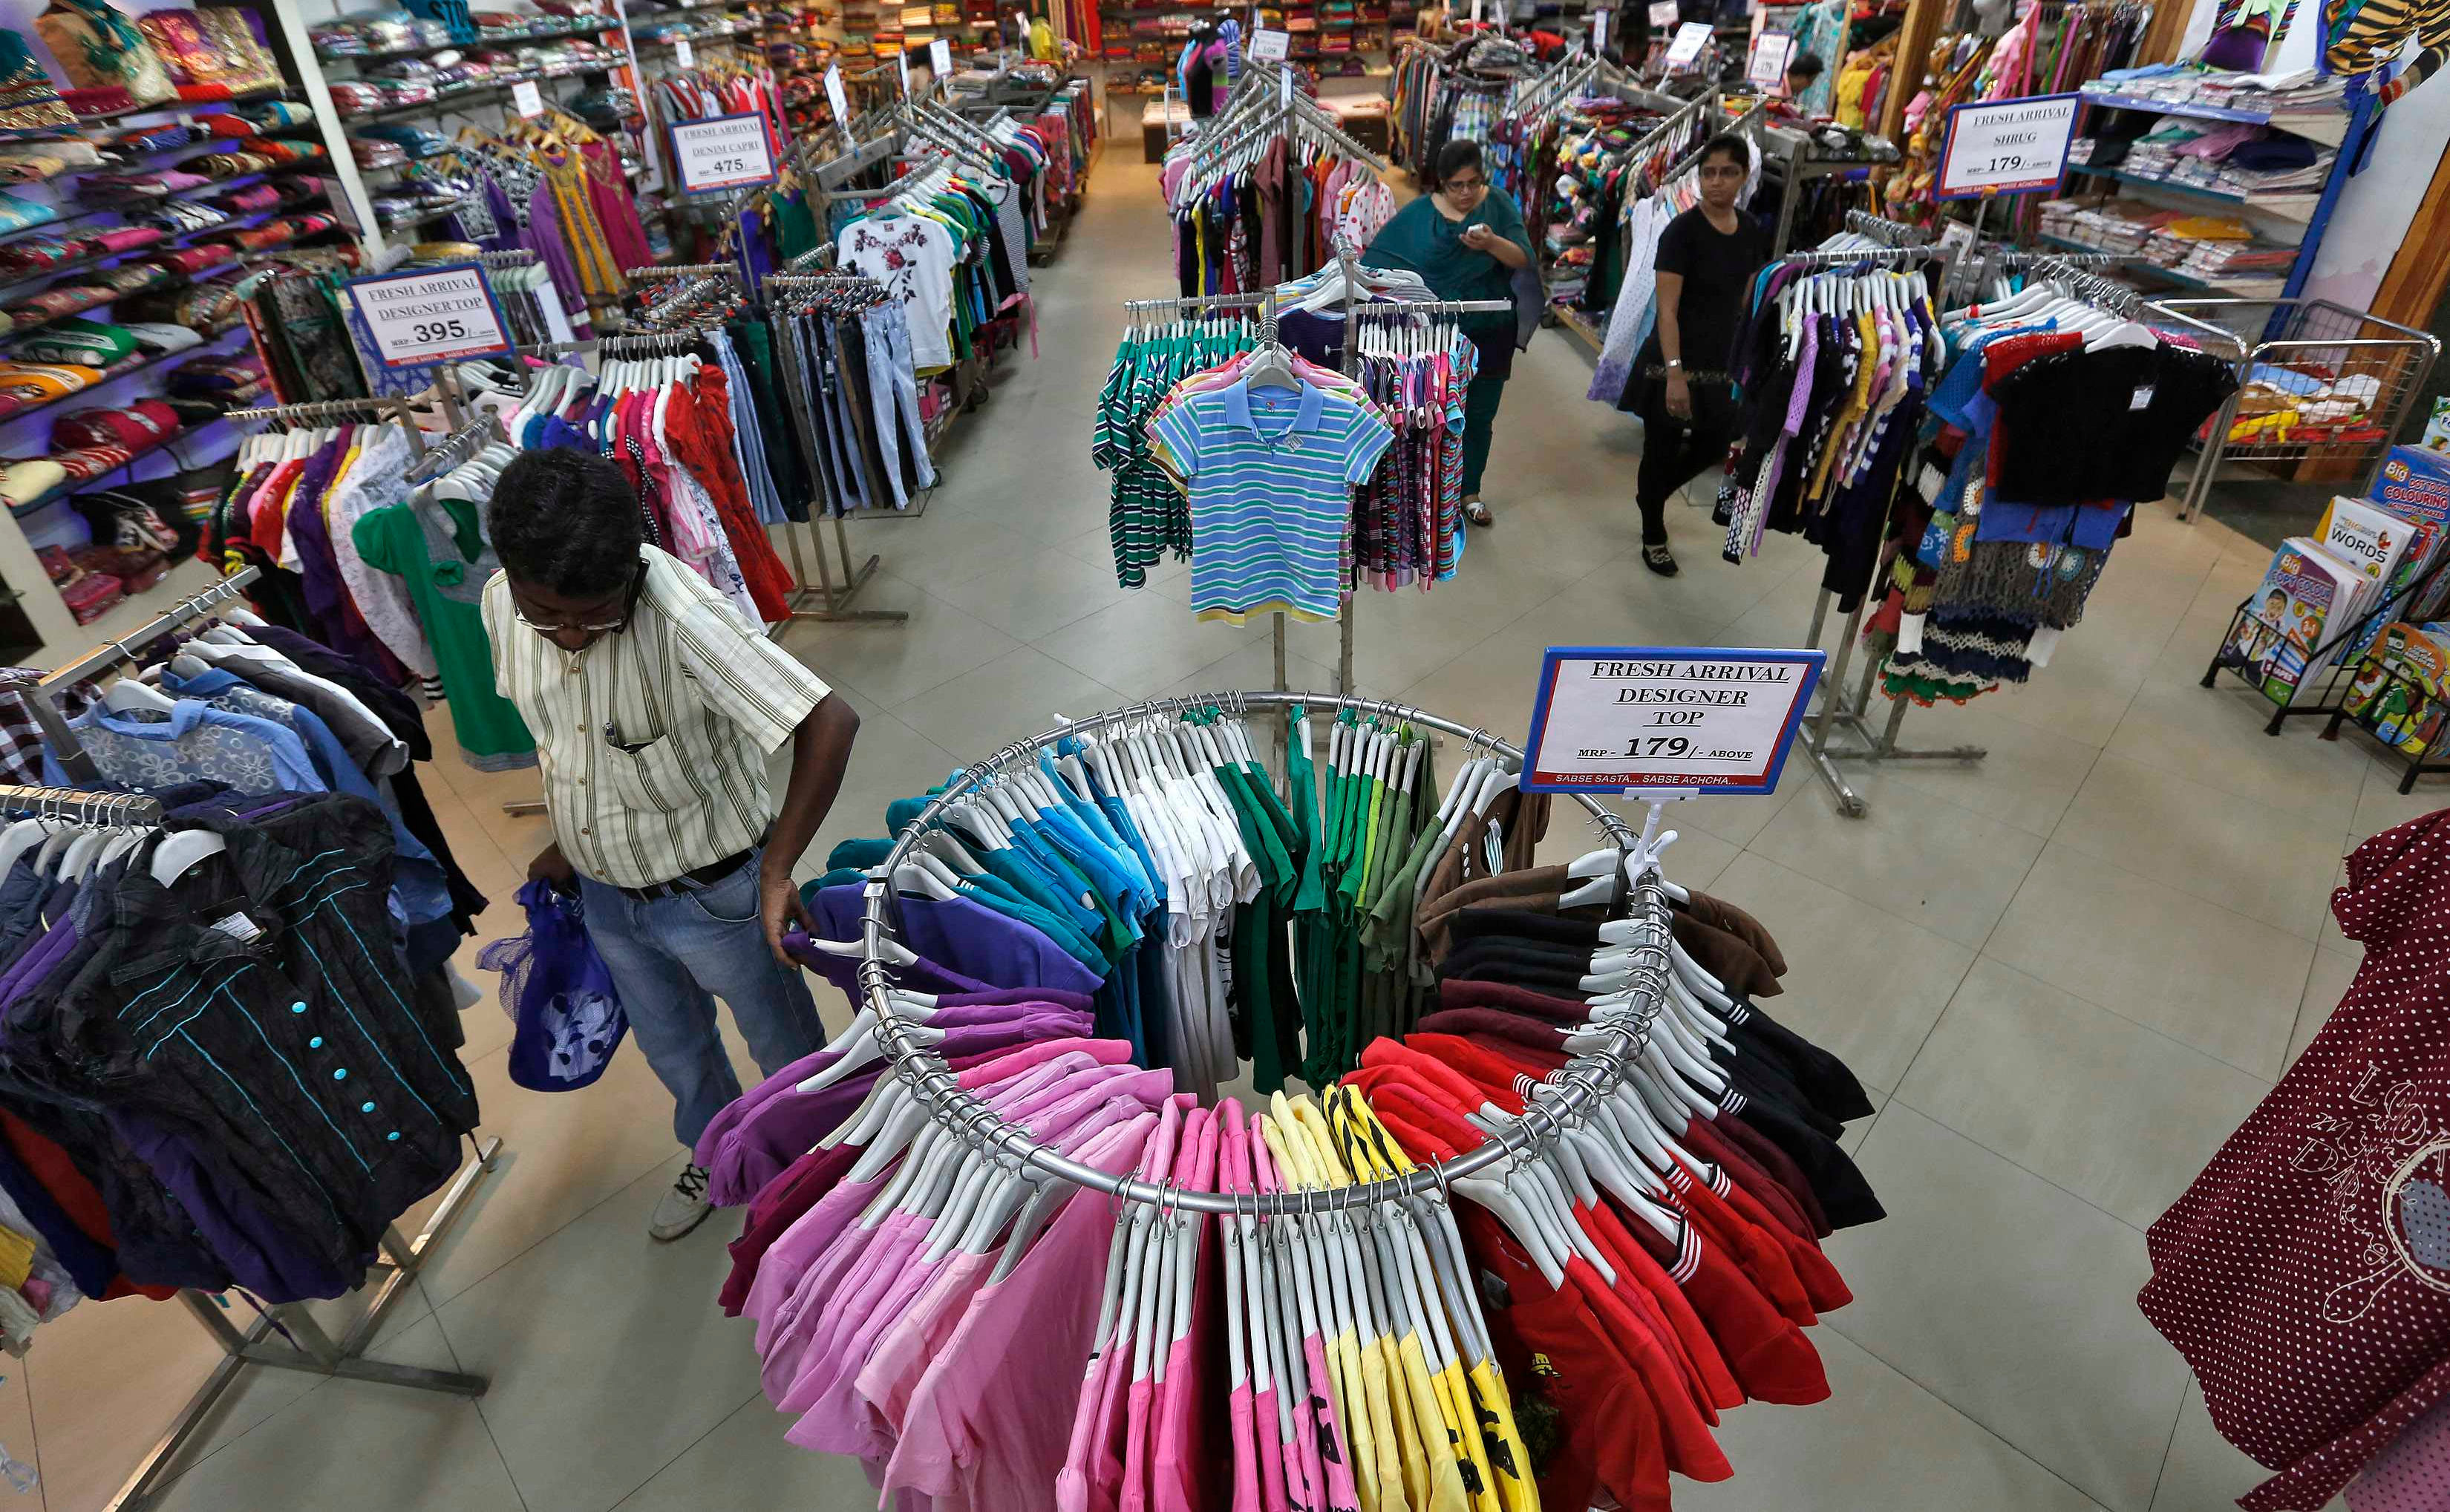 Customers picking clothes in a store used to portray retail management in an article about MBA specialization